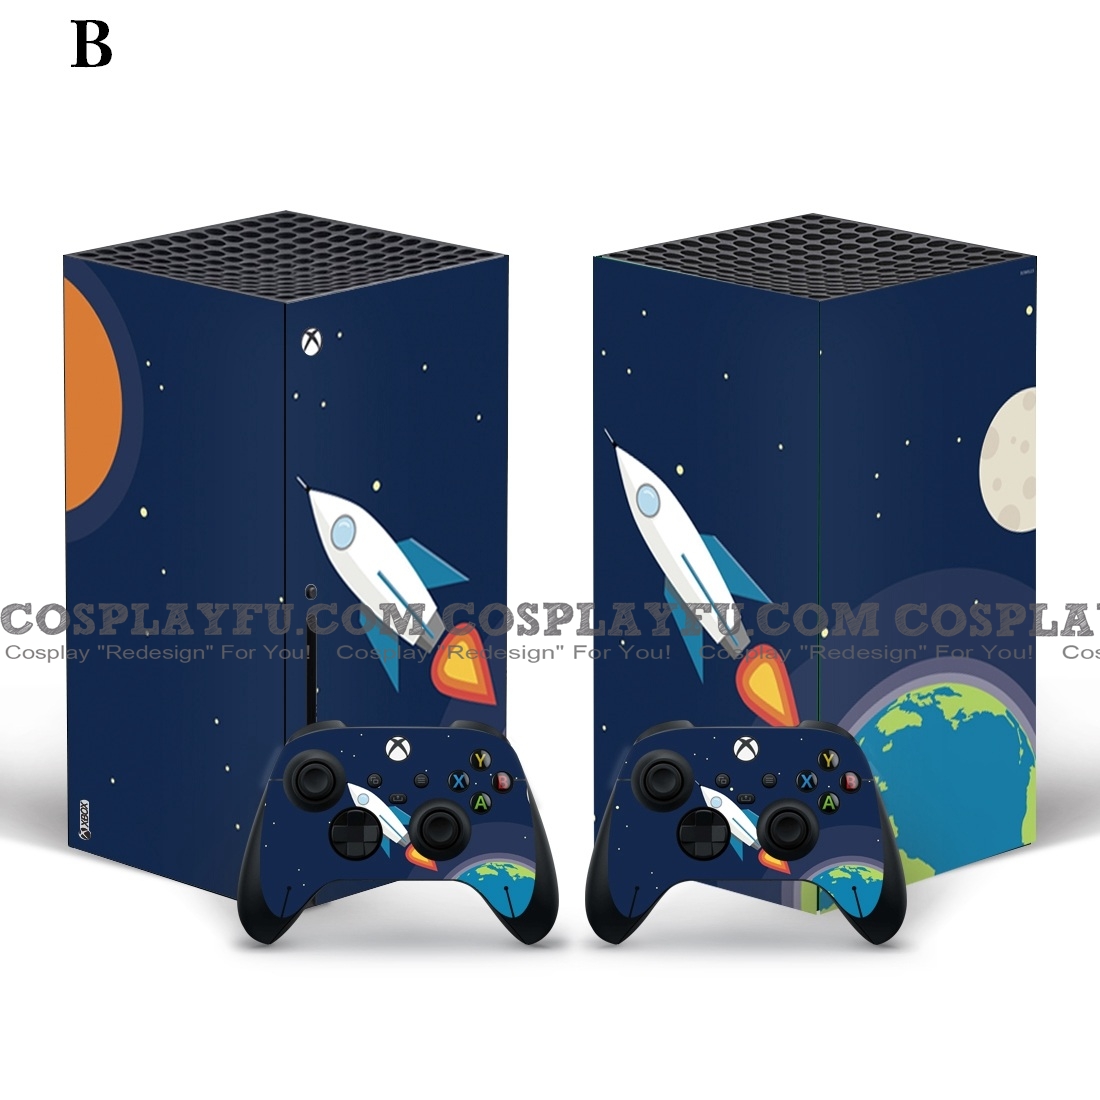 Space Skin Decal Per Xbox Series X Console And Controller, Pieno Wrap Vinyl Cosplay